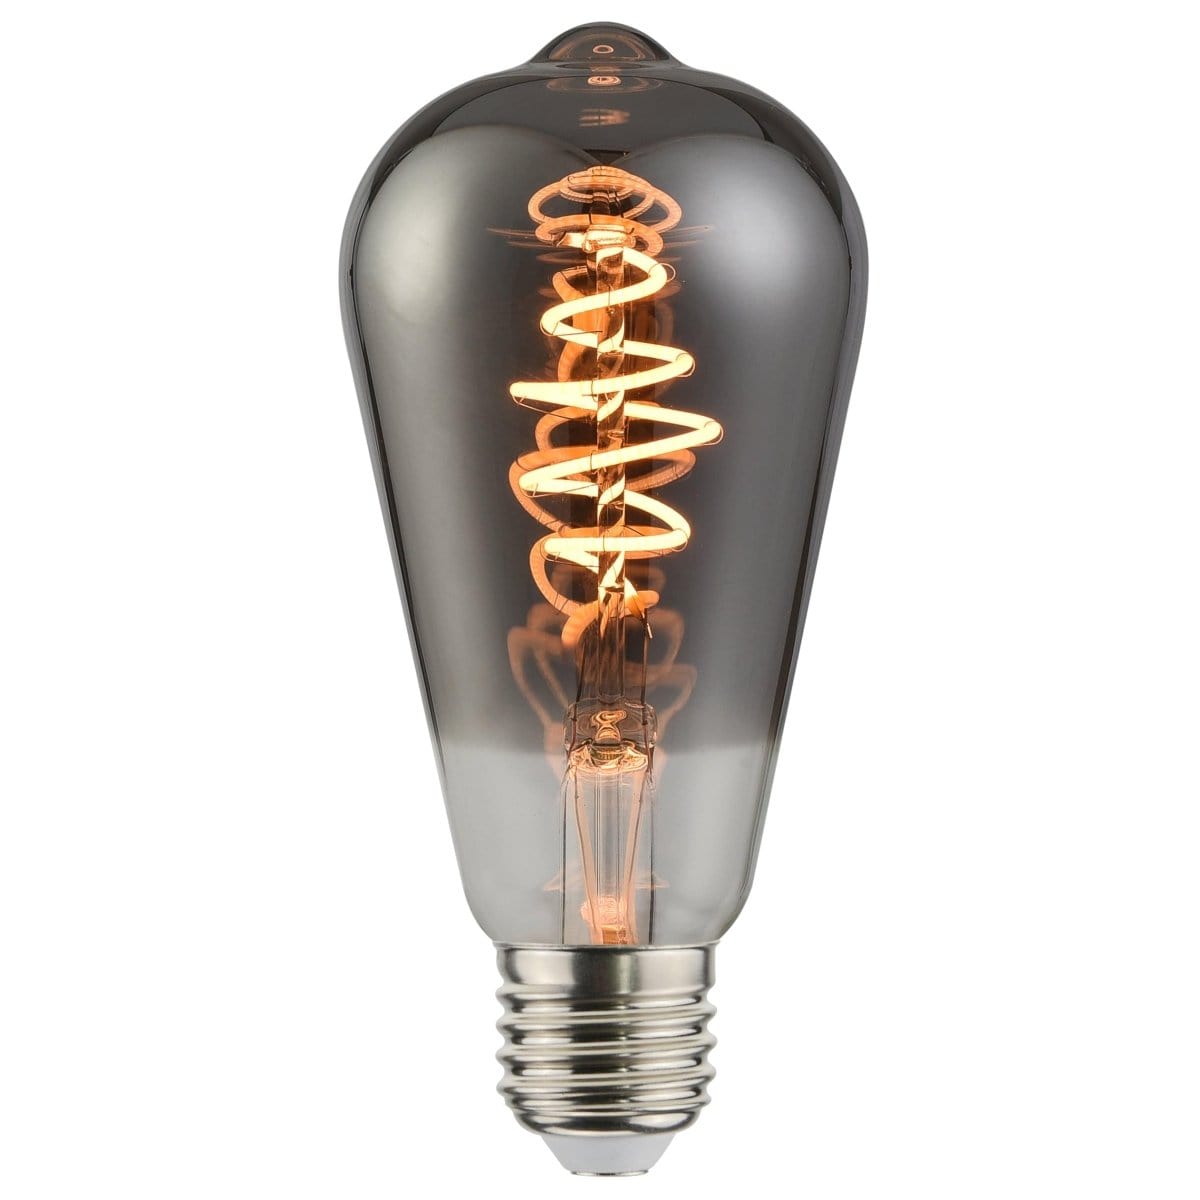 Heavenly Chandeliers Light Bulbs E27 St64 Decorative, Dimmable Light Bulb Smoked Glass